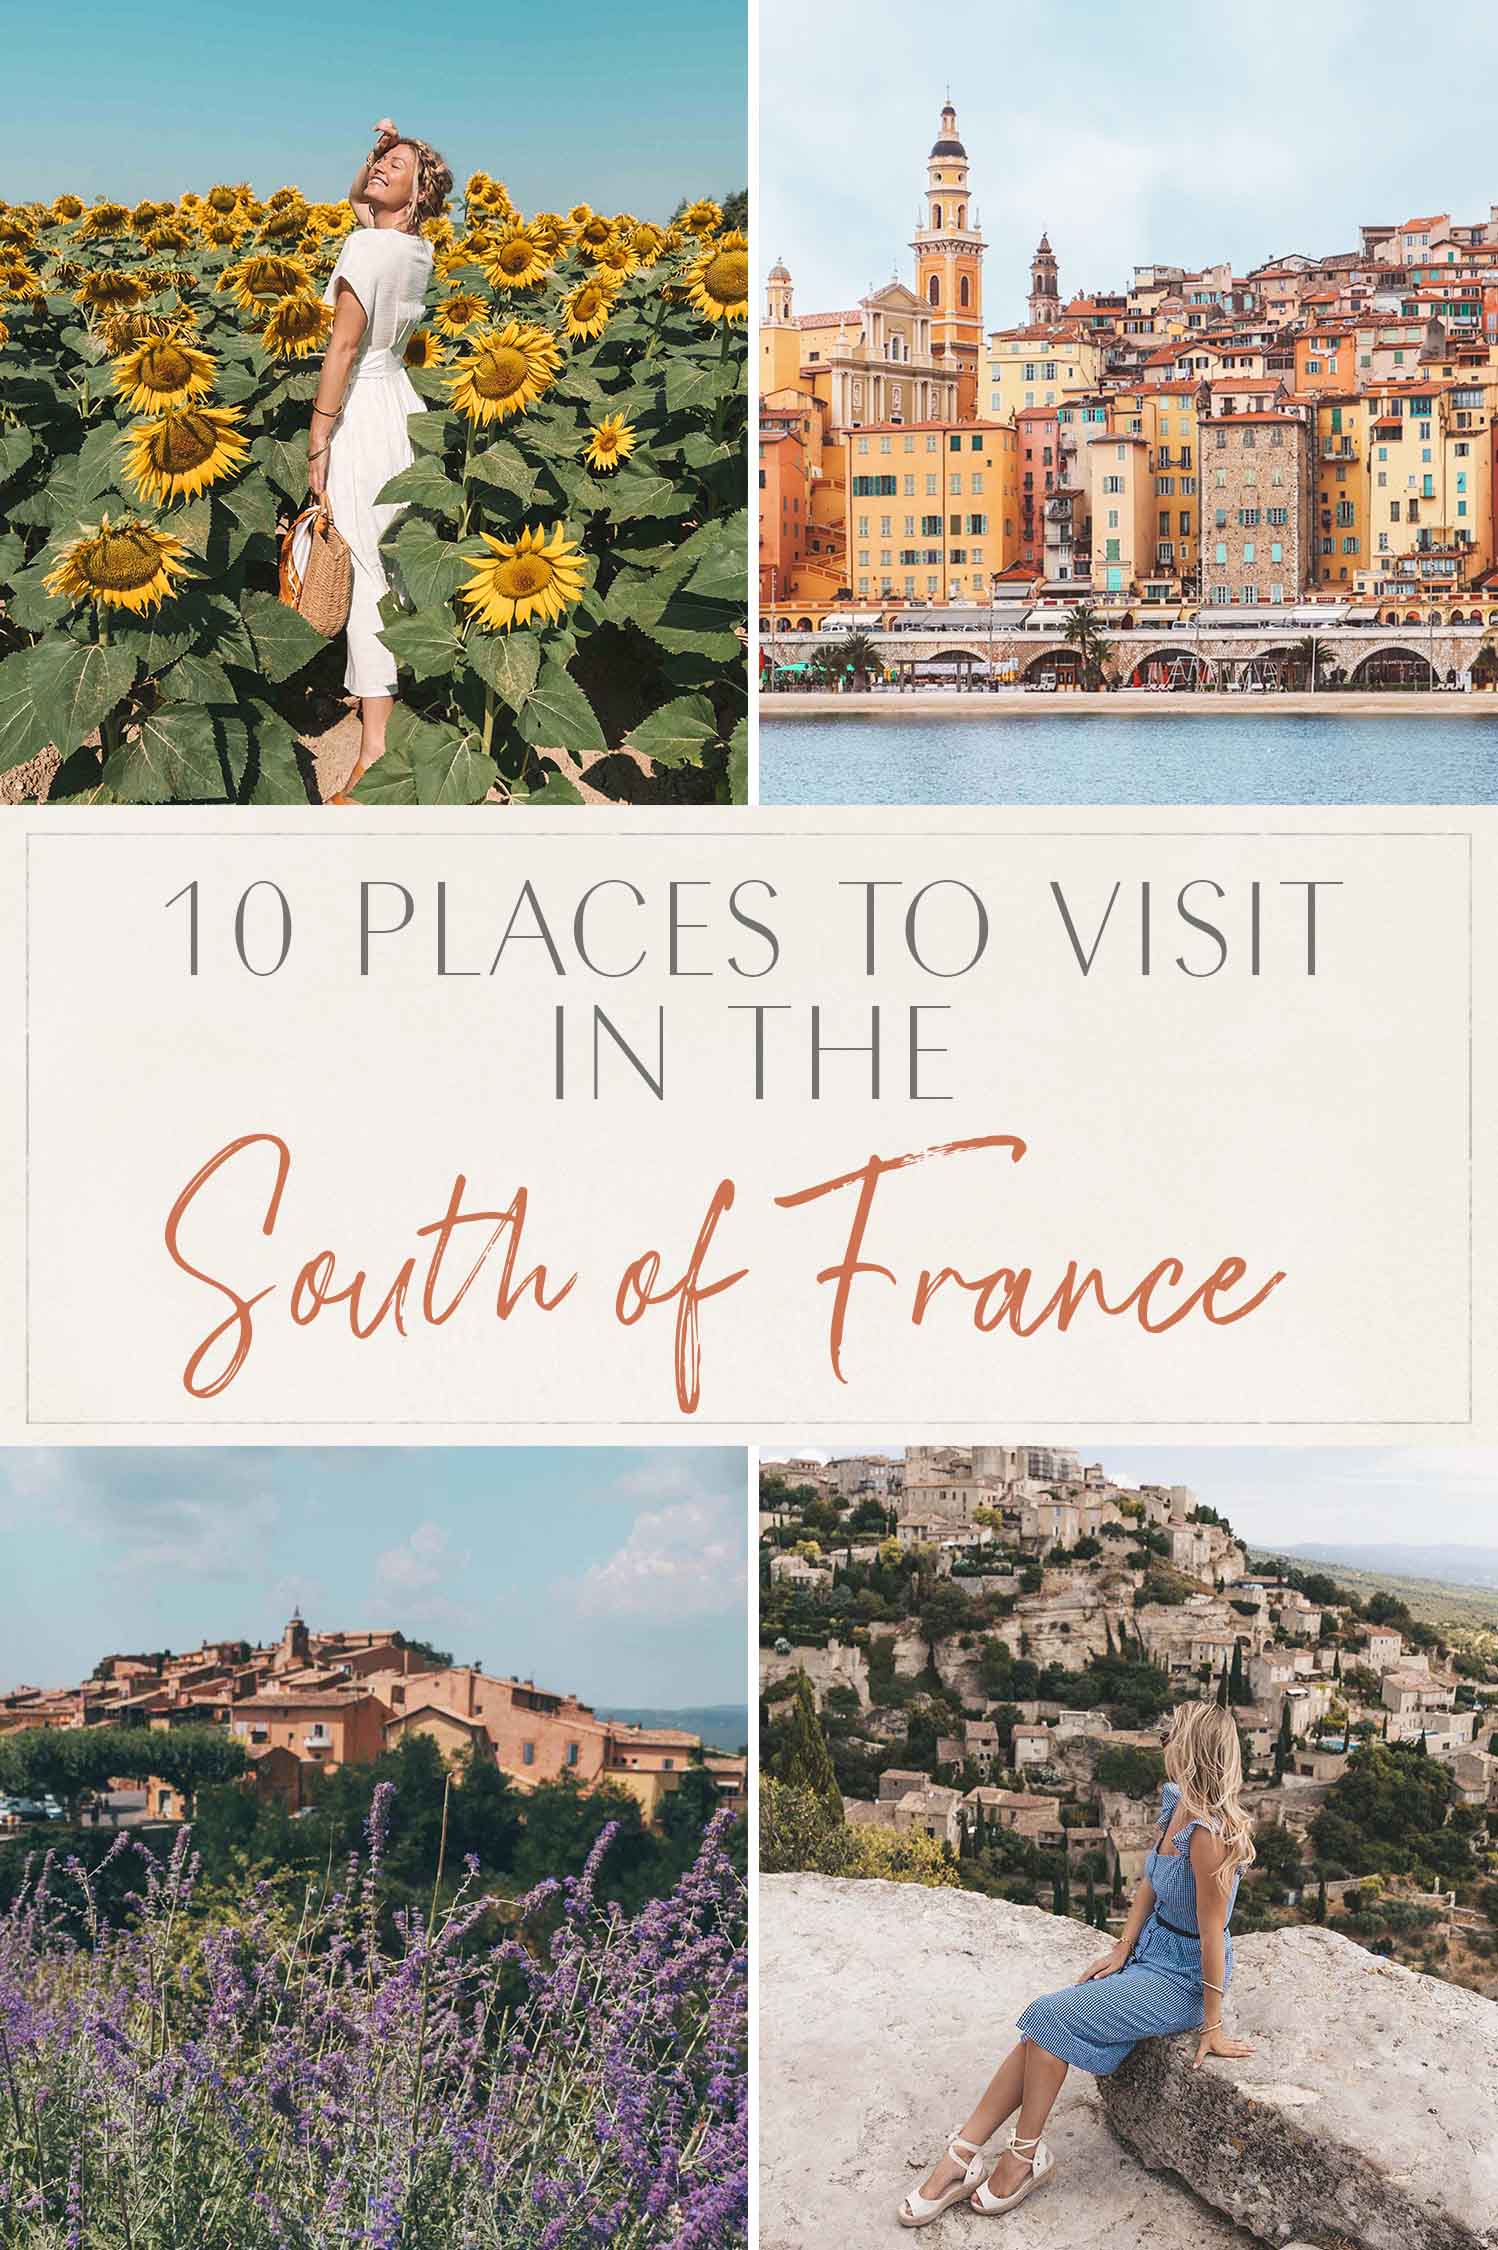 10 Places to Visit South of France